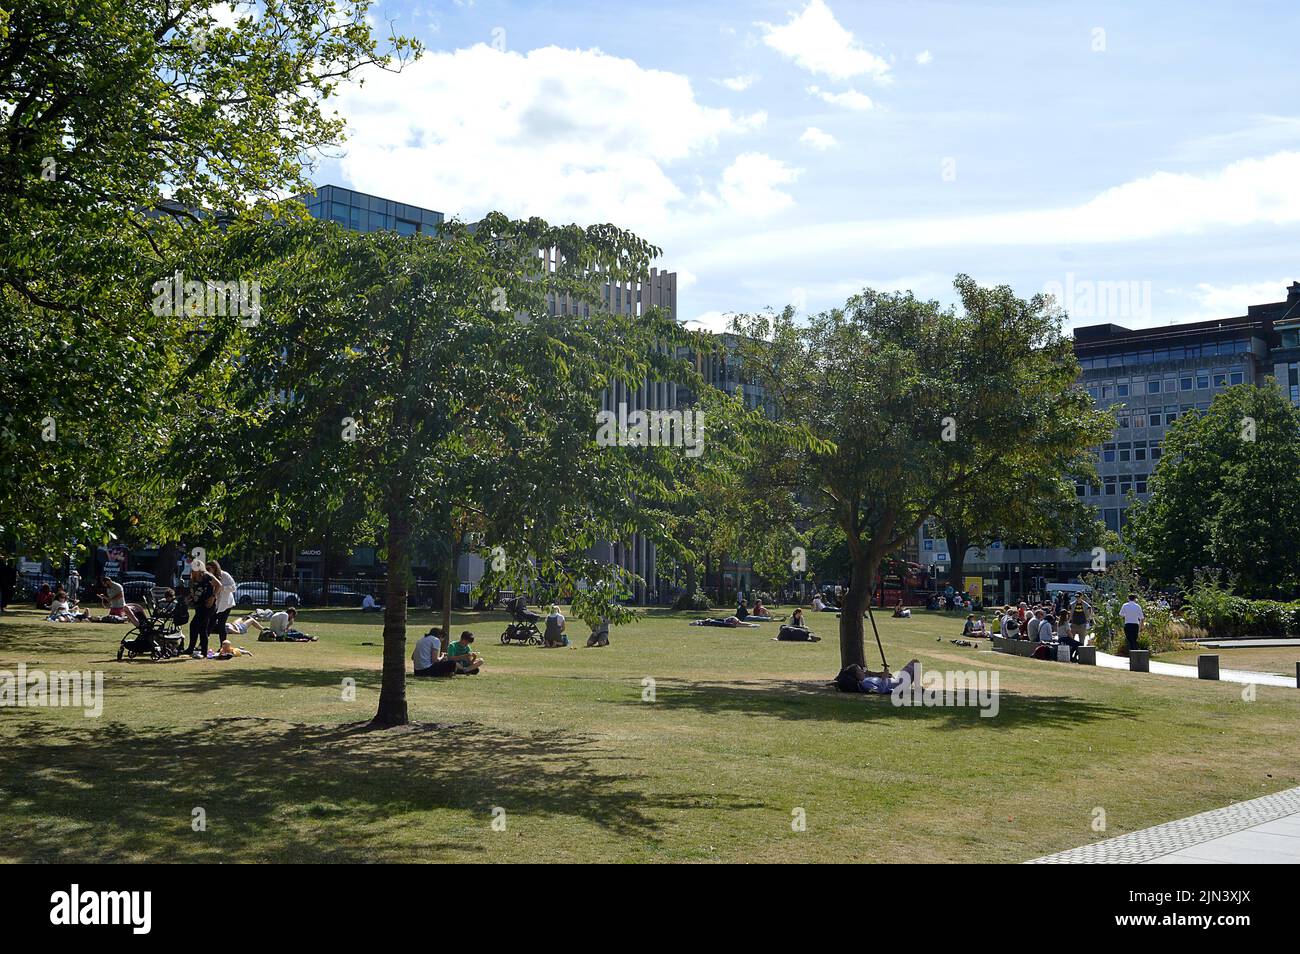 EDINBURGH, SCOTLAND - 1 AUGUST 2022: People relax in summer sunshine in St Andrew Square. Stock Photo